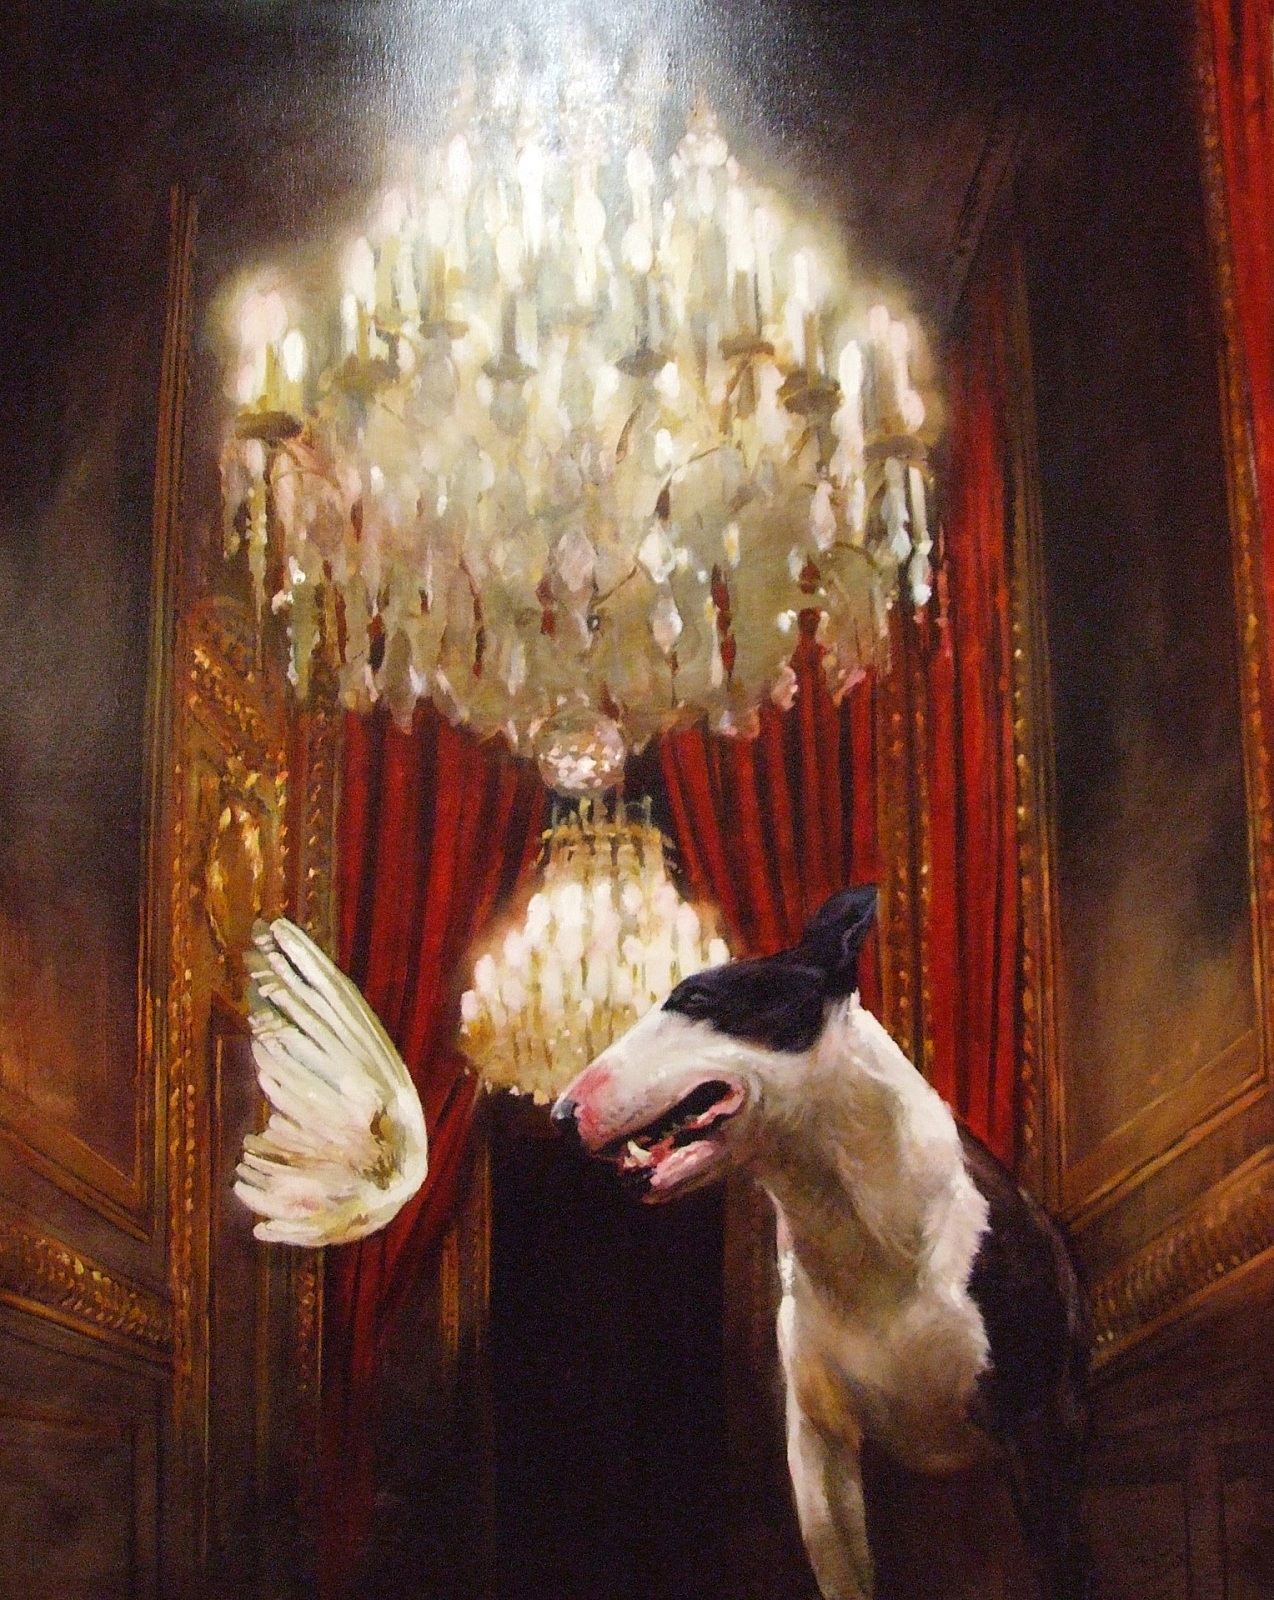 Bullterrier - 2008, oil on canvas, 160 x 200 cm, private collection, RO - 17